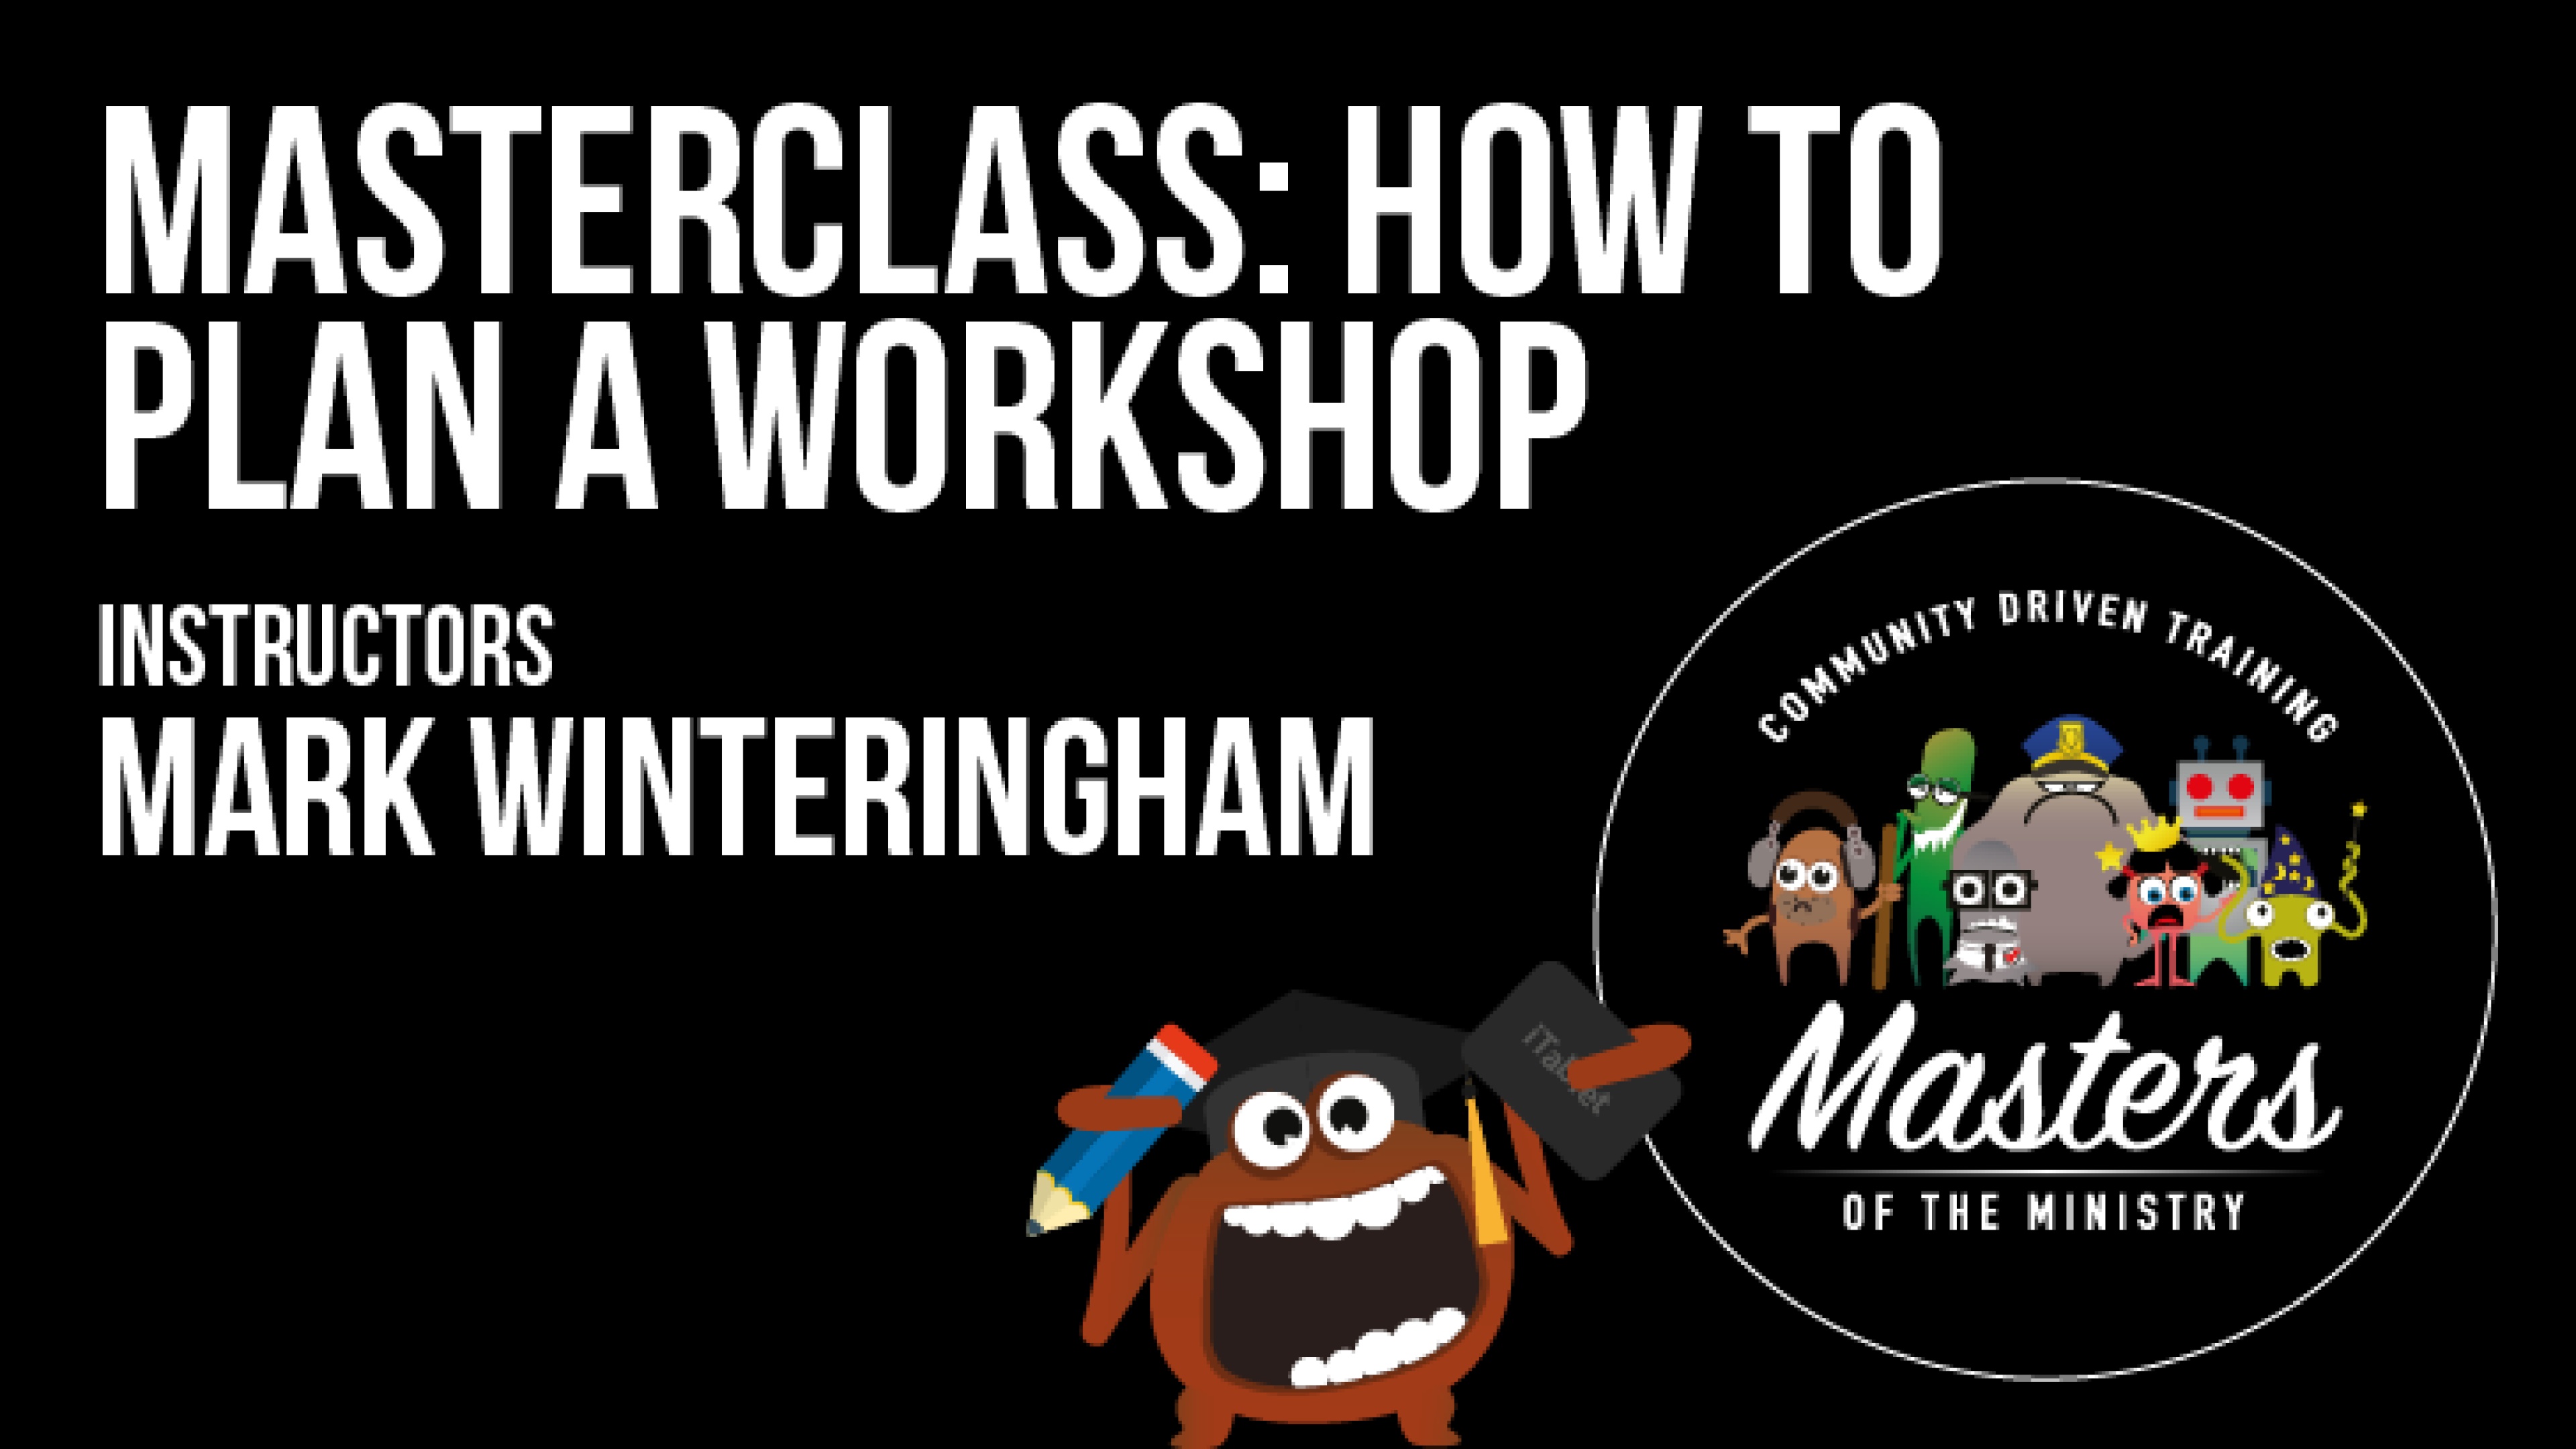 How to Plan a Workshop with Mark Winteringham